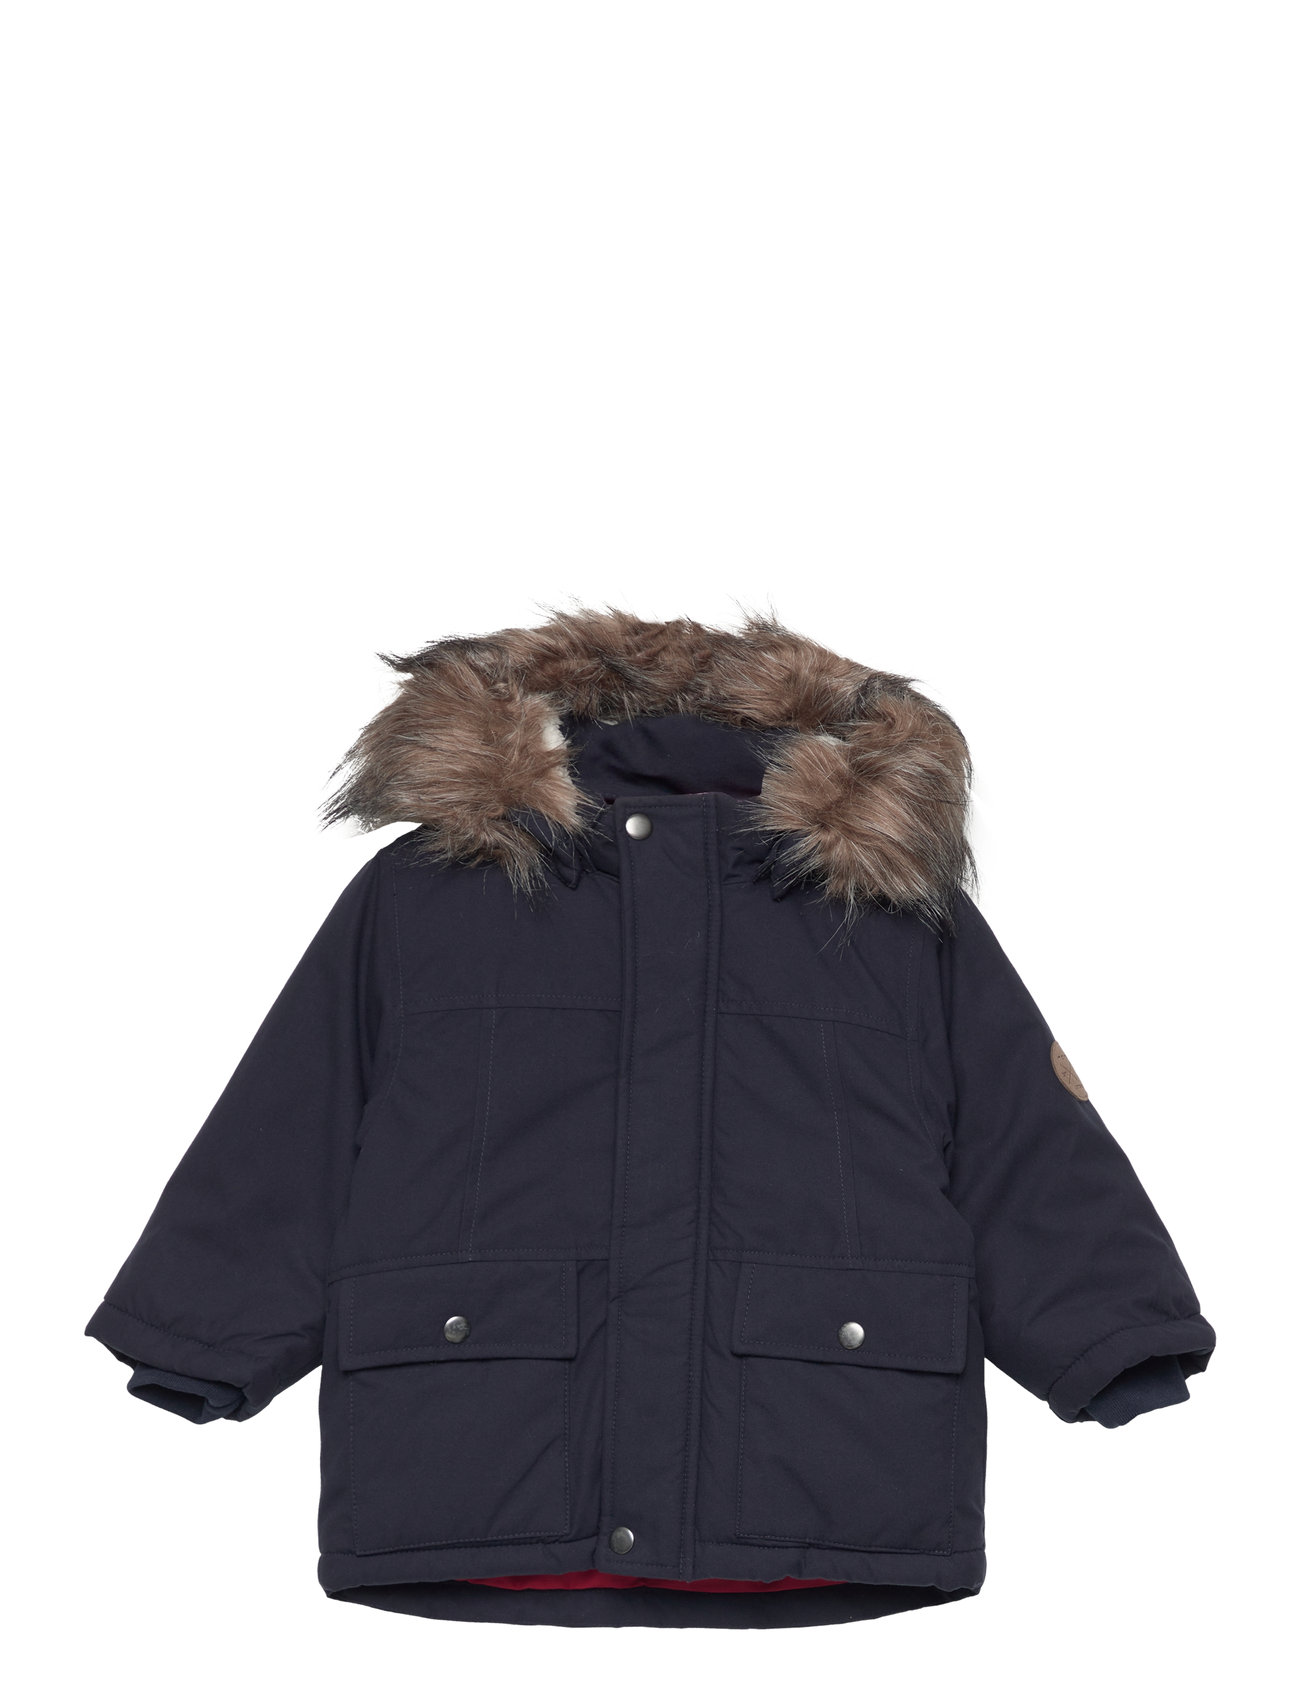 name it Nmmmarlin Parka Jacket Pb Fo - 27.50 €. Buy Parkas from name it  online at Boozt.com. Fast delivery and easy returns